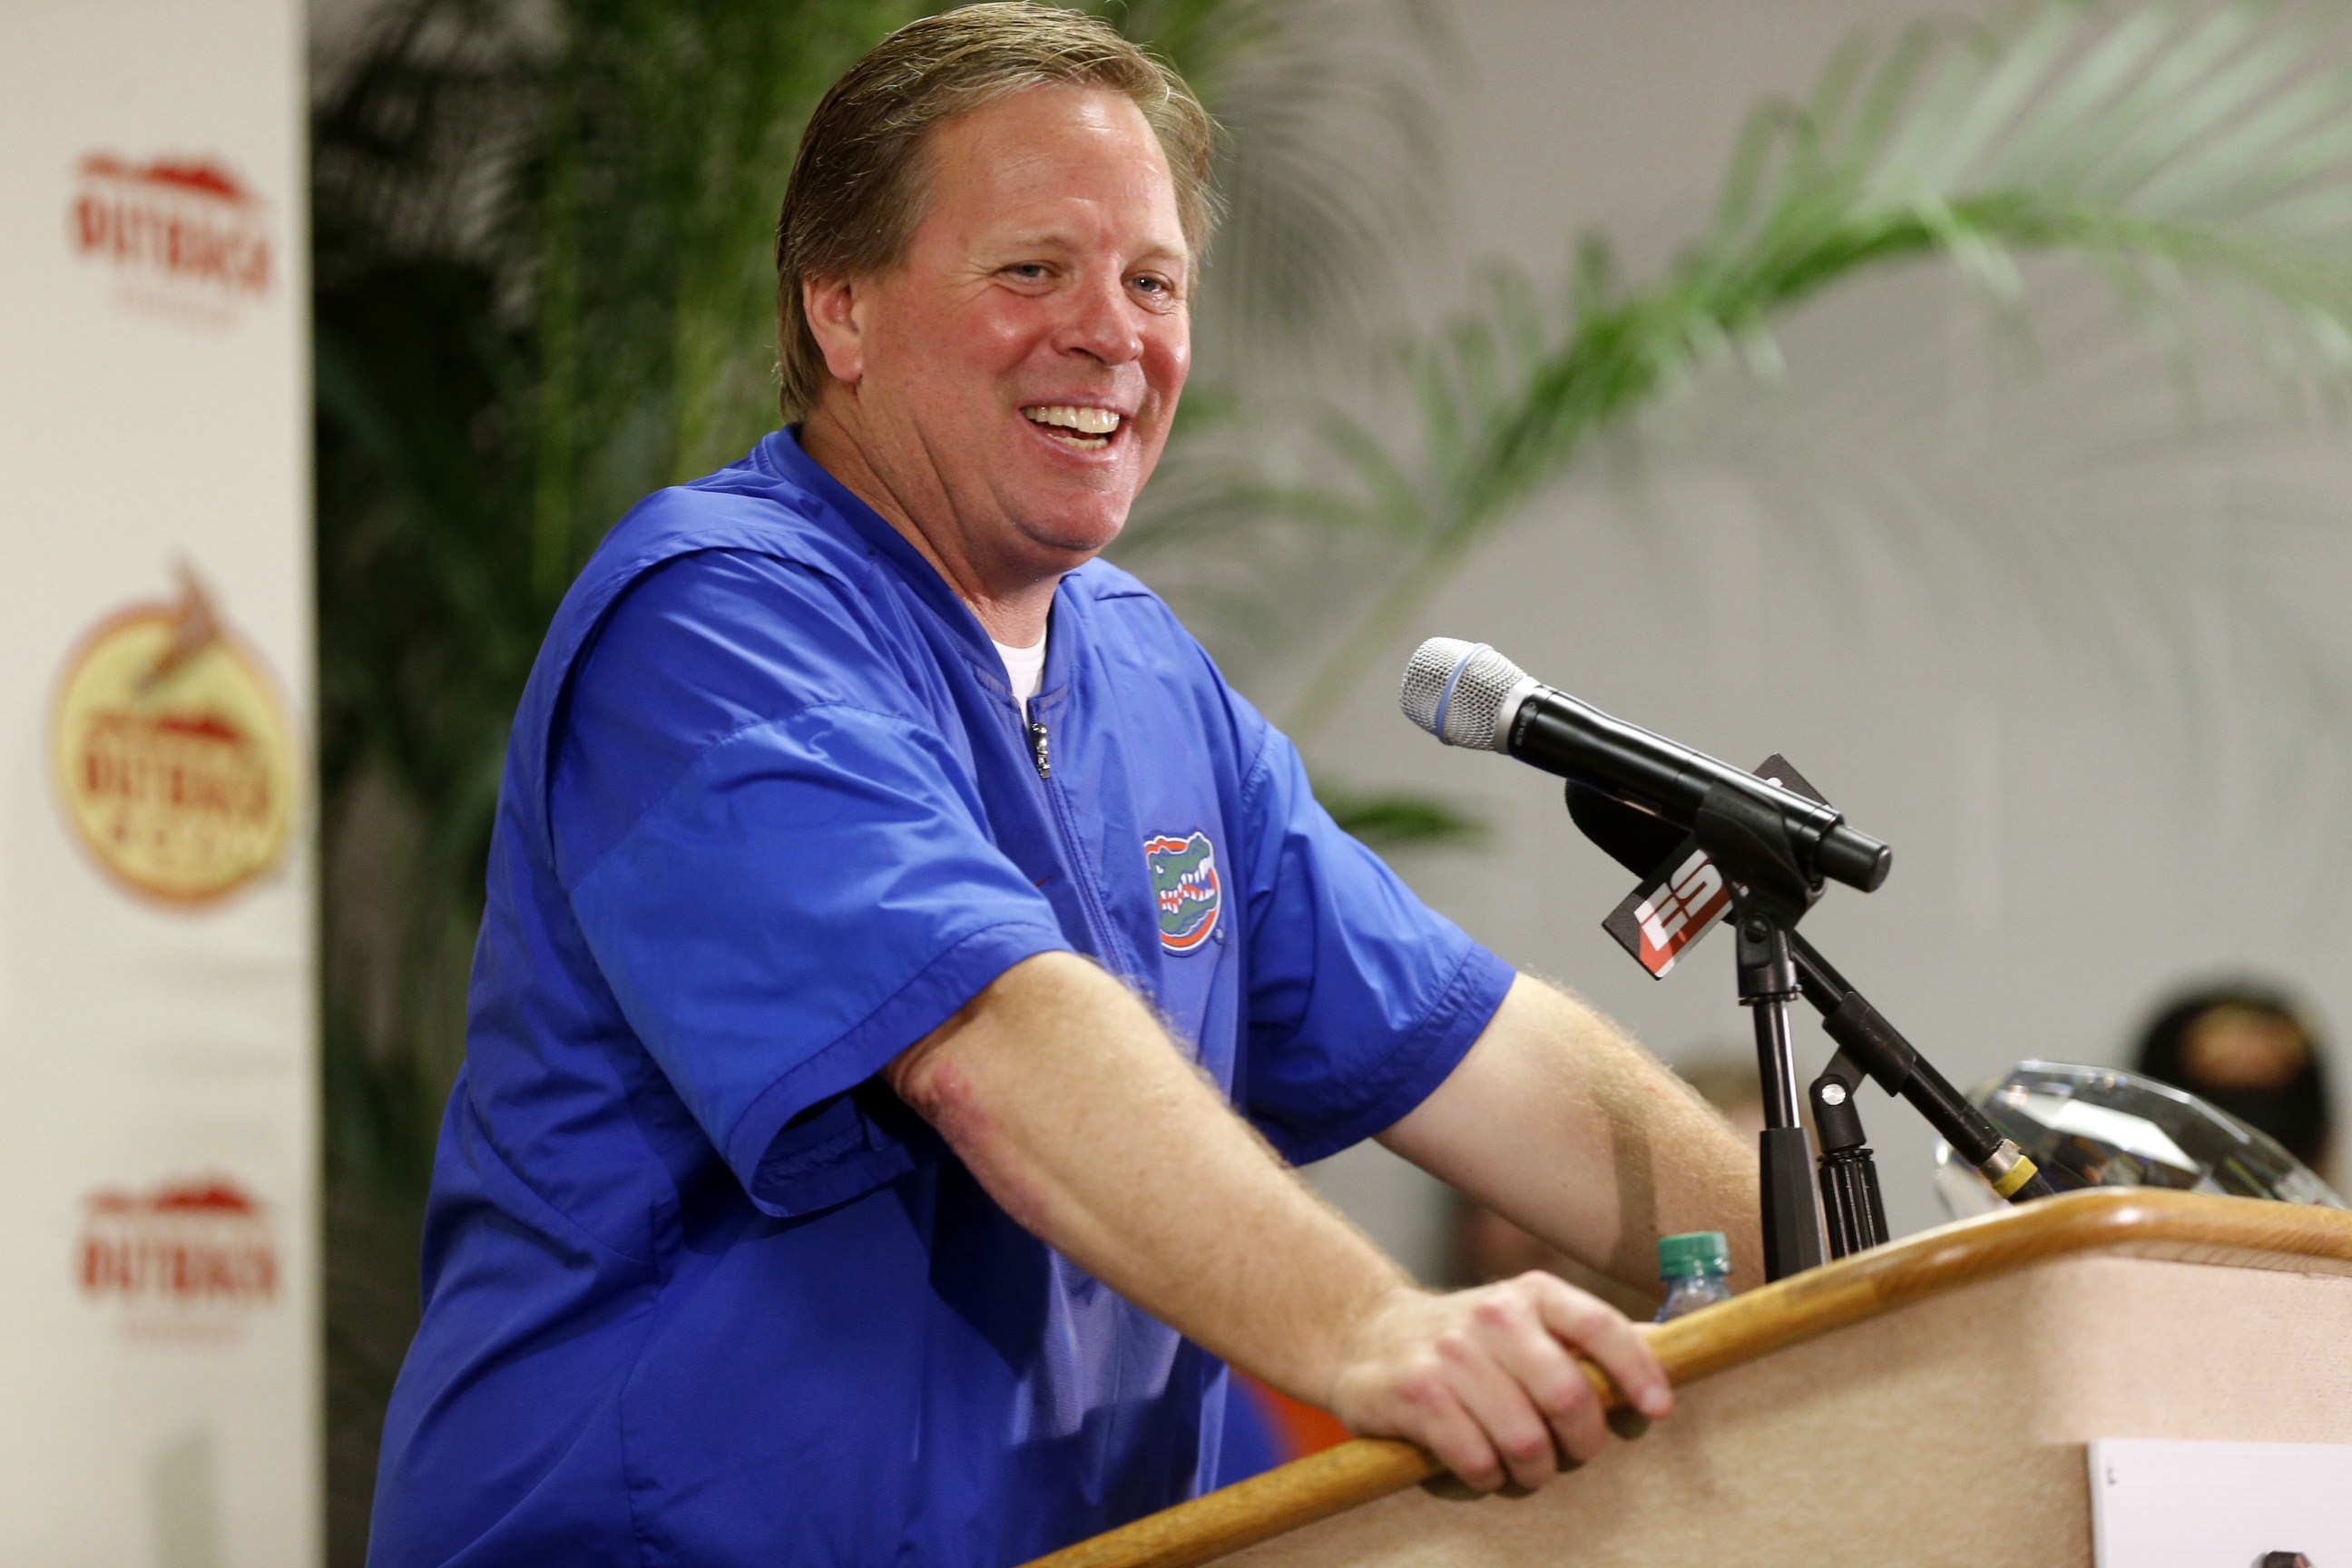 Jan 2, 2017; Tampa , FL, USA; Florida Gators head coach Jim McElwain speaks to the media while presentint the trophy during a press conference after defeating Iowa Hawkeyes 30-3 at Raymond James Stadium. Mandatory Credit: Kim Klement-USA TODAY Sports